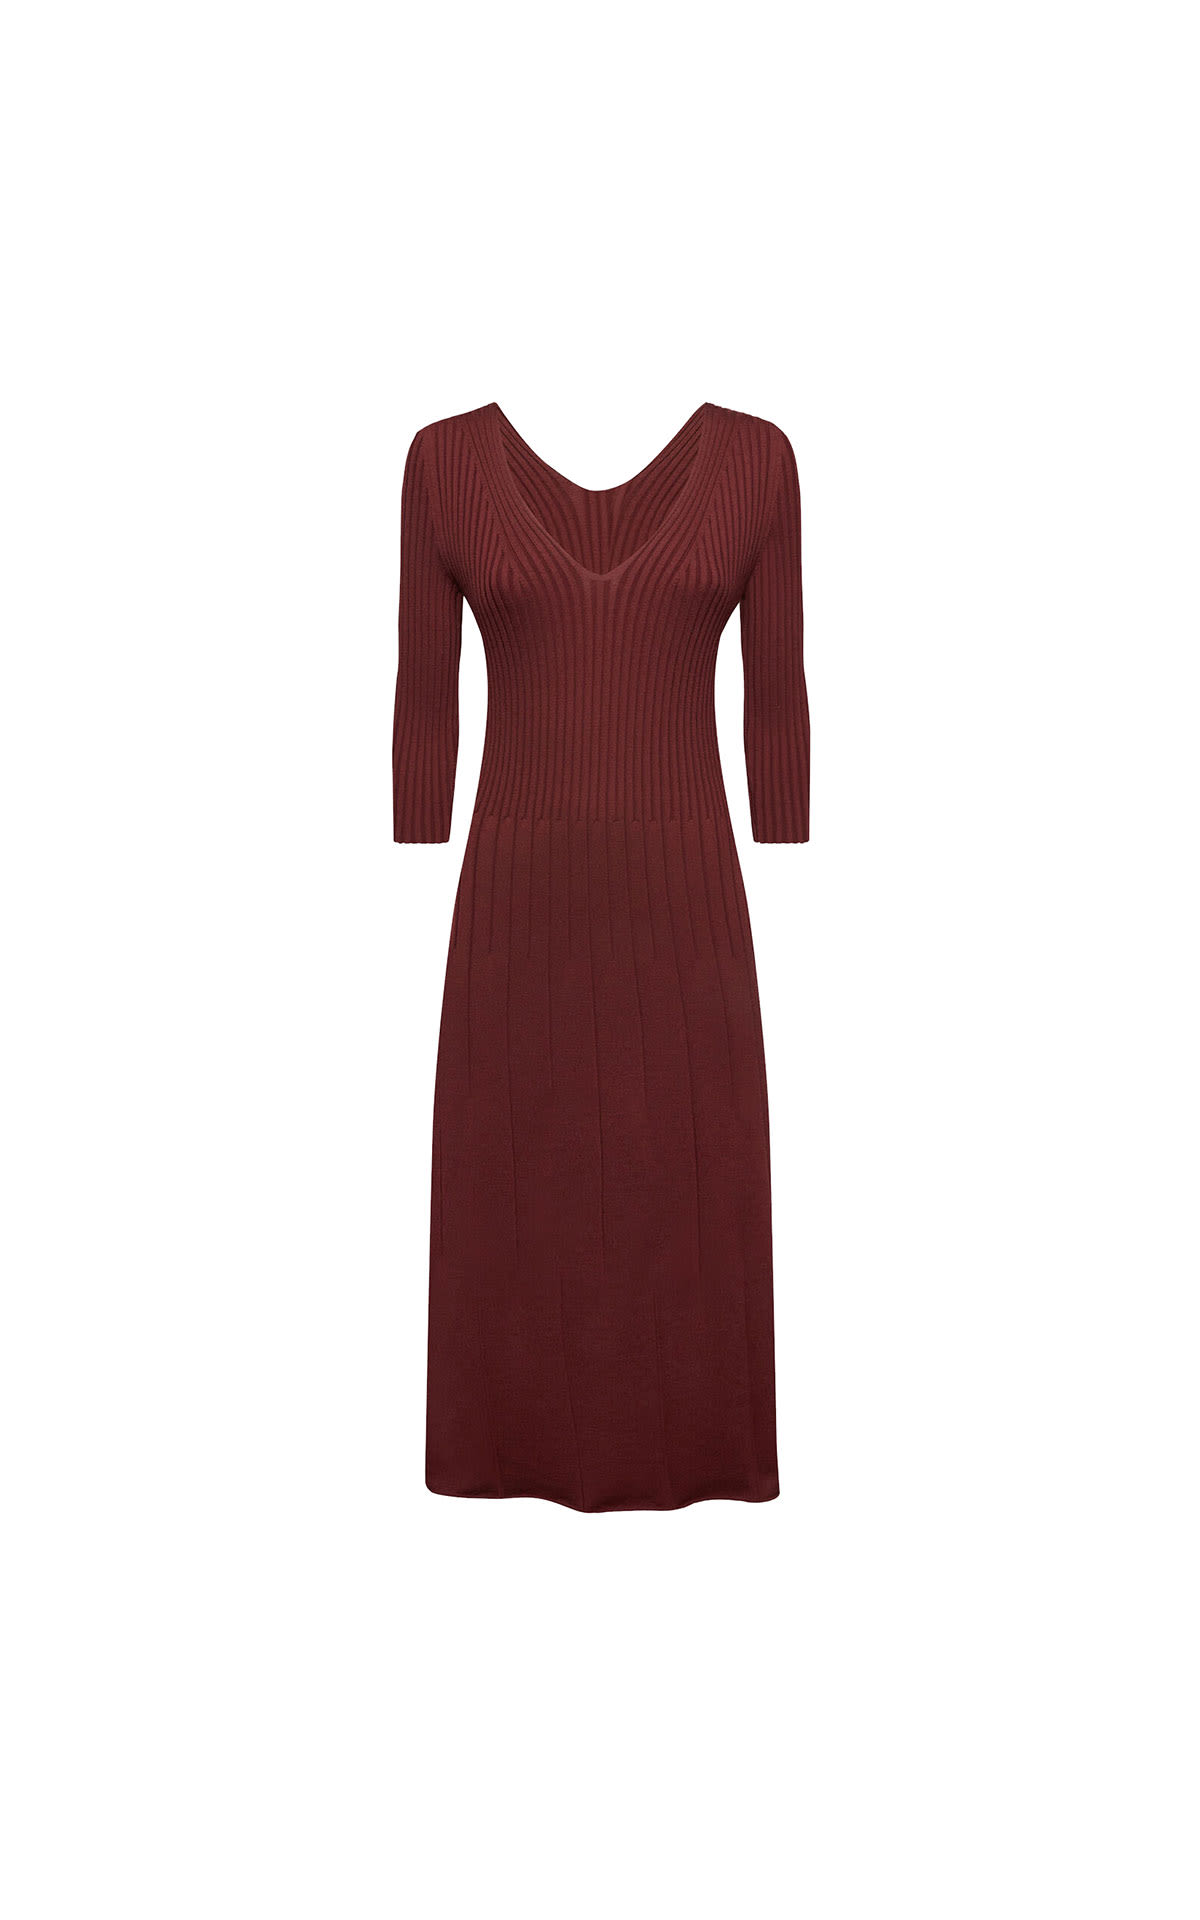 Wolford Merino rib flared dress  from Bicester Village